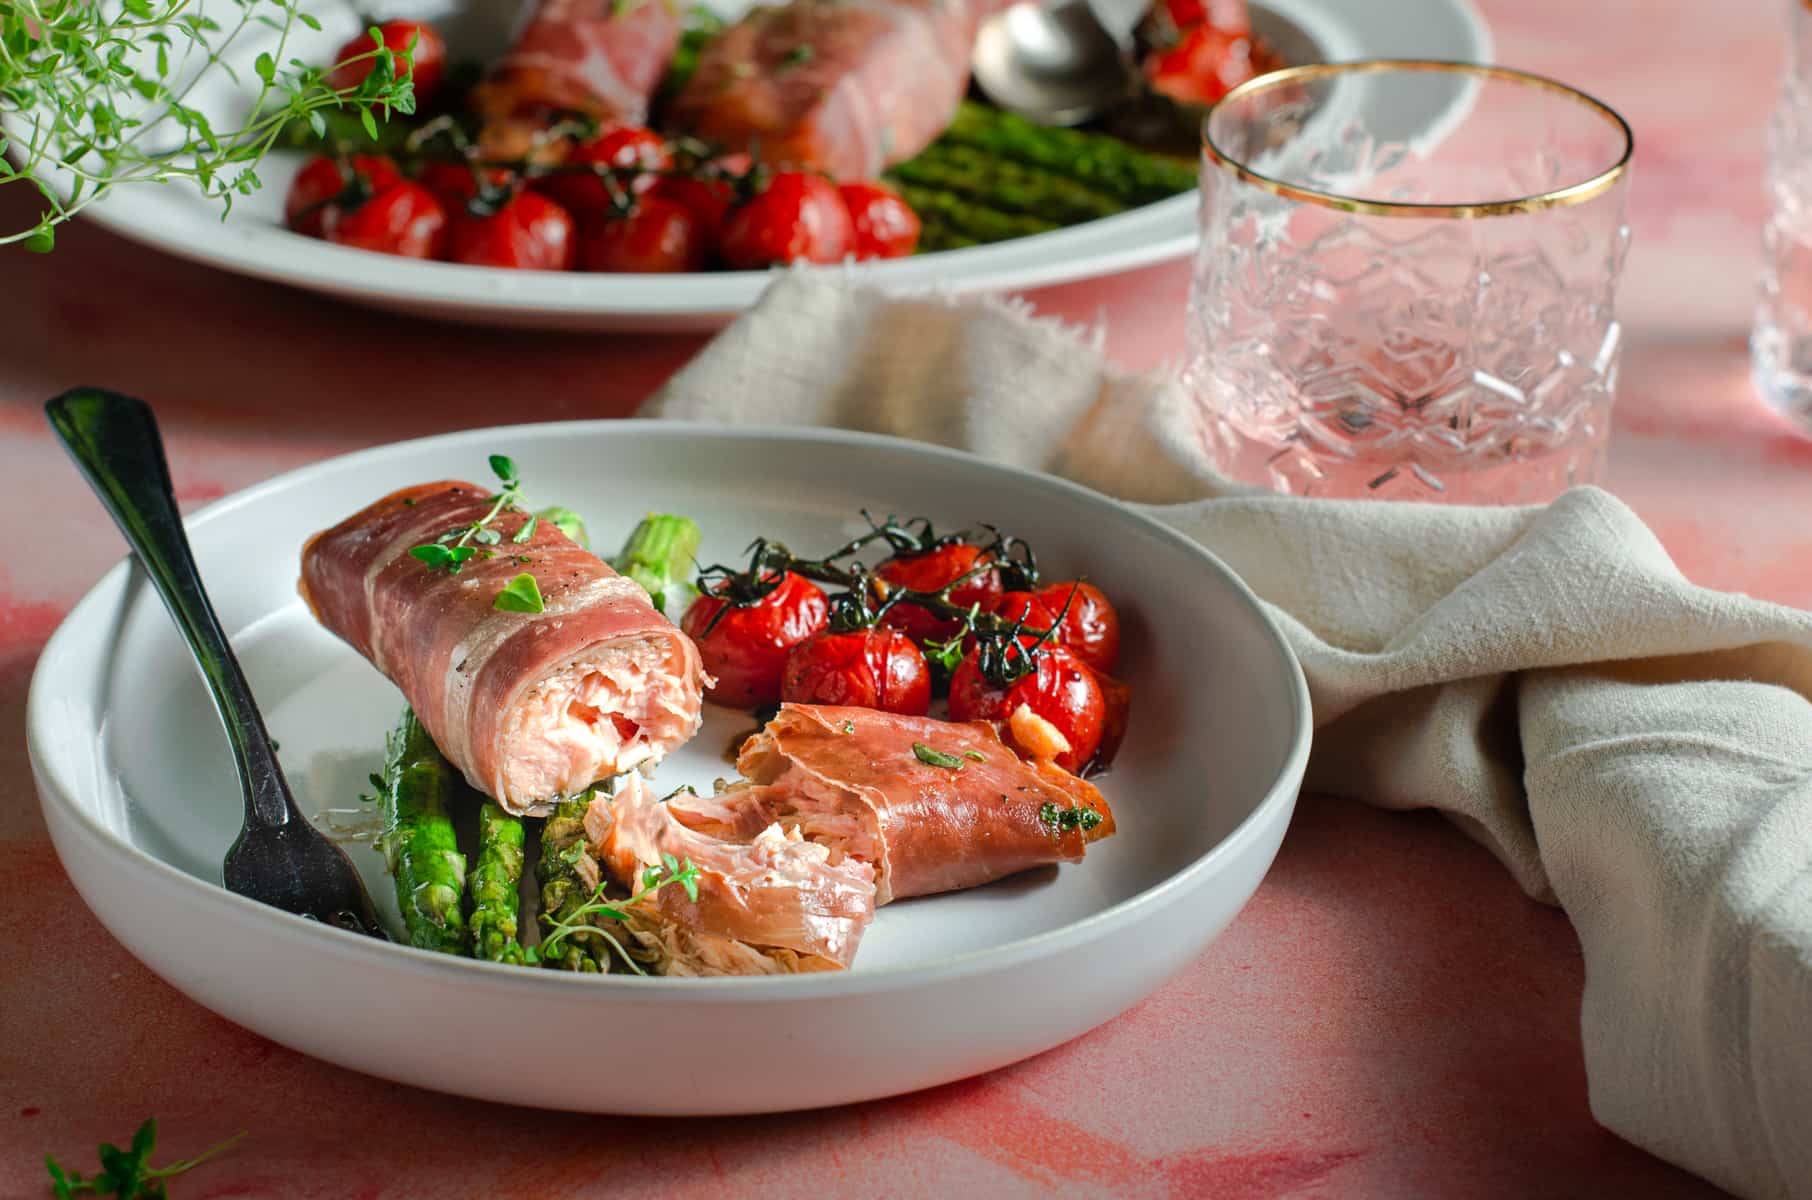 A serving suggestion for salmon wrapped in parma ham with asparagus and roasted tomatoes.